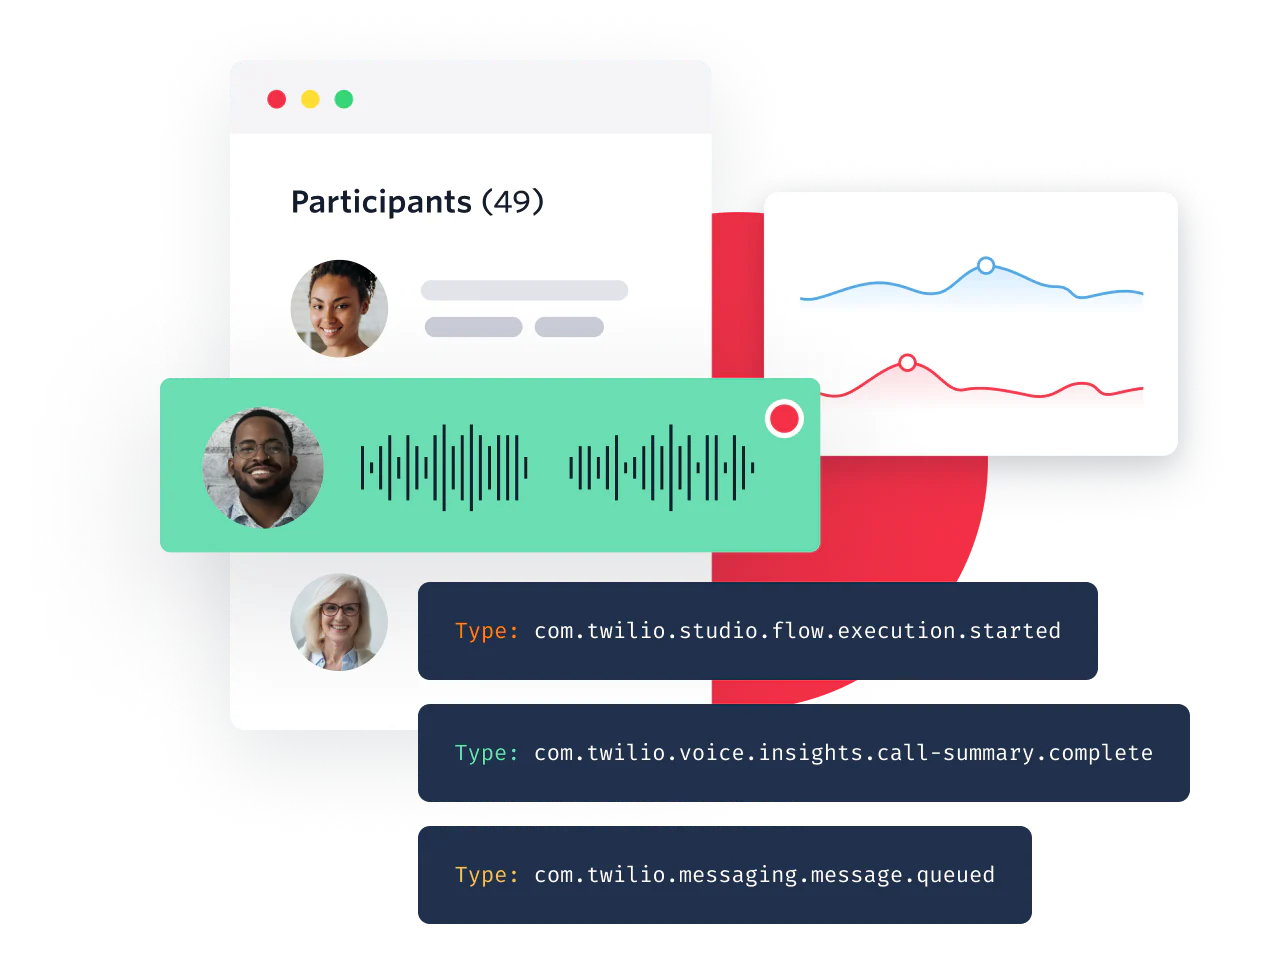 Event Streams by Twilio powers accurate and actionable customer data